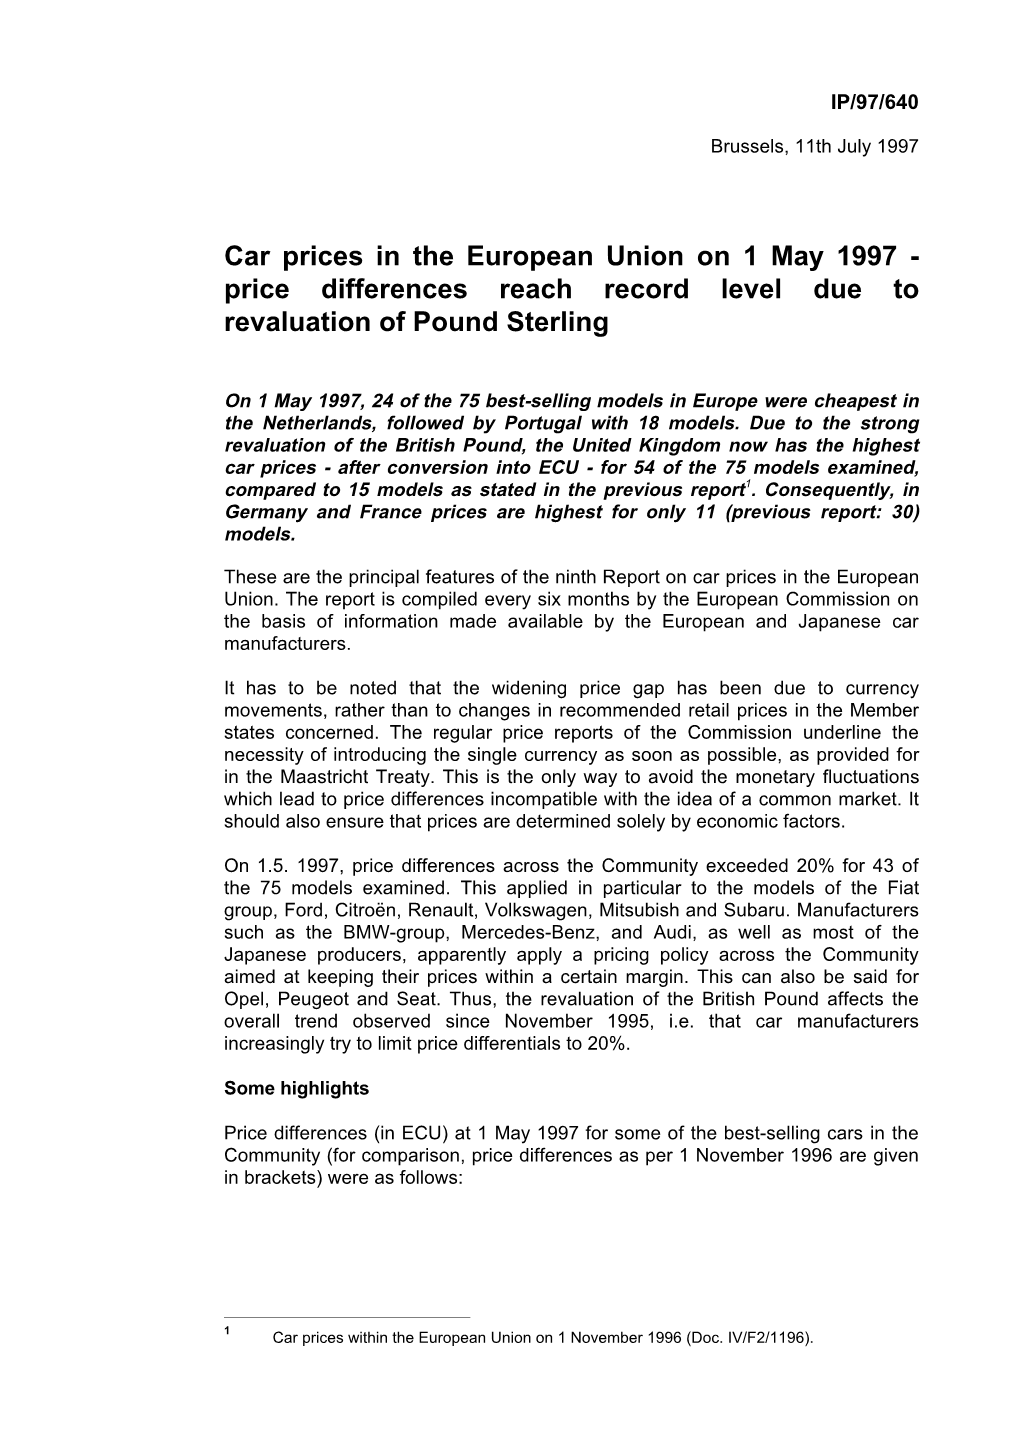 Car Prices in the European Union on 1 May 1997 - Price Differences Reach Record Level Due to Revaluation of Pound Sterling